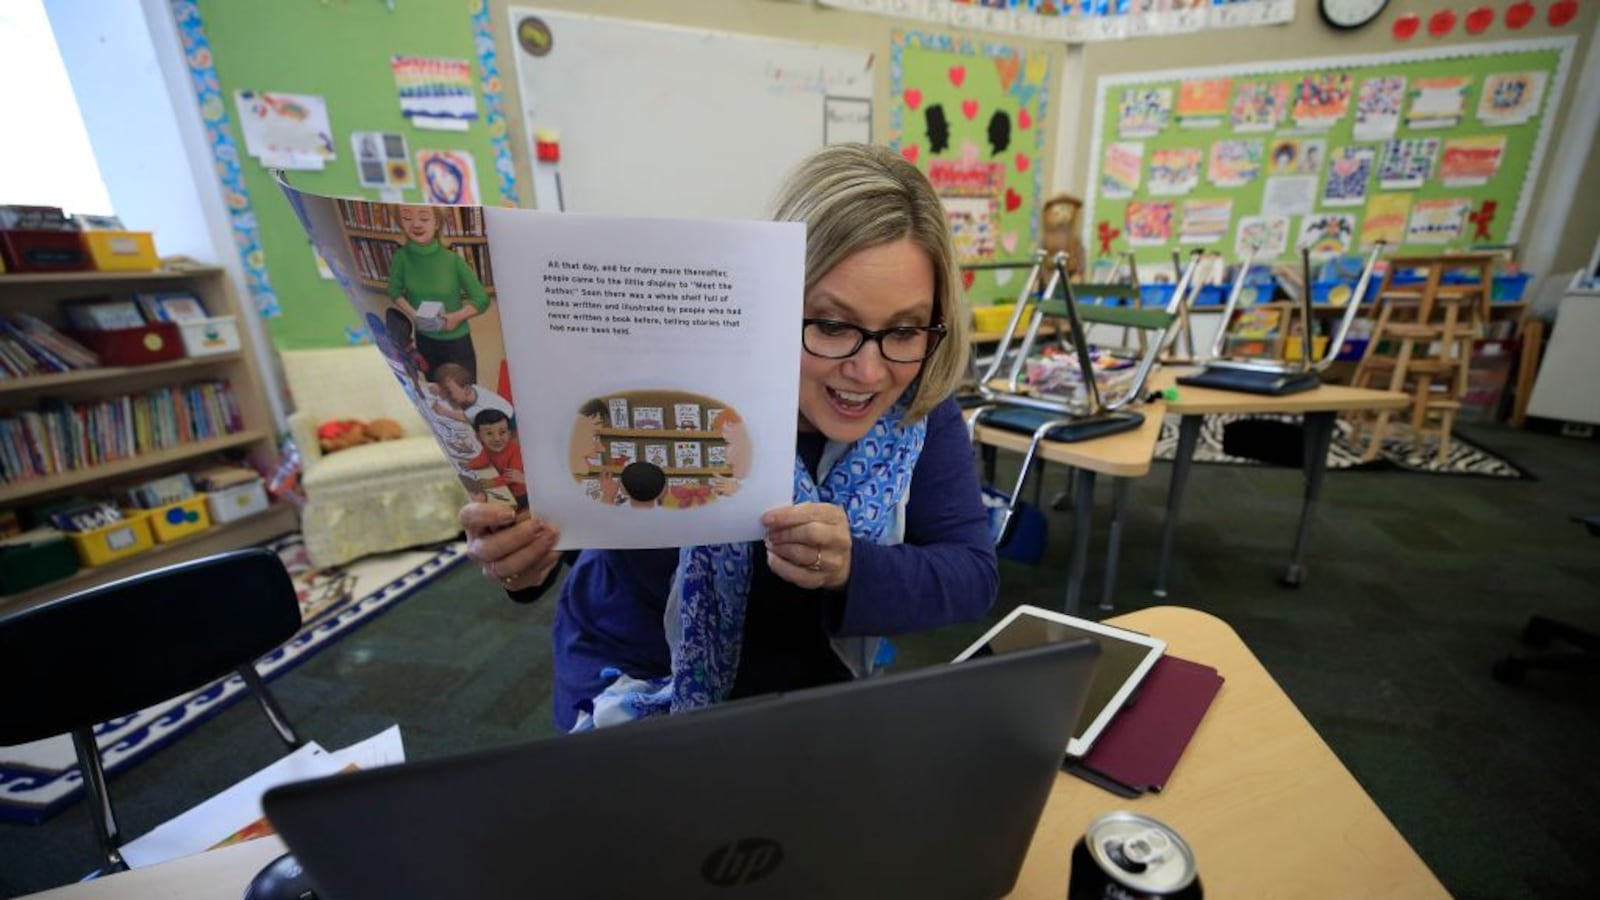 Joanne Collins Brock, a second grade teacher, teaches online in her empty classroom on April 15, 2020 in Goshen, Kentucky. (Photo by Andy Lyons/Getty Images)